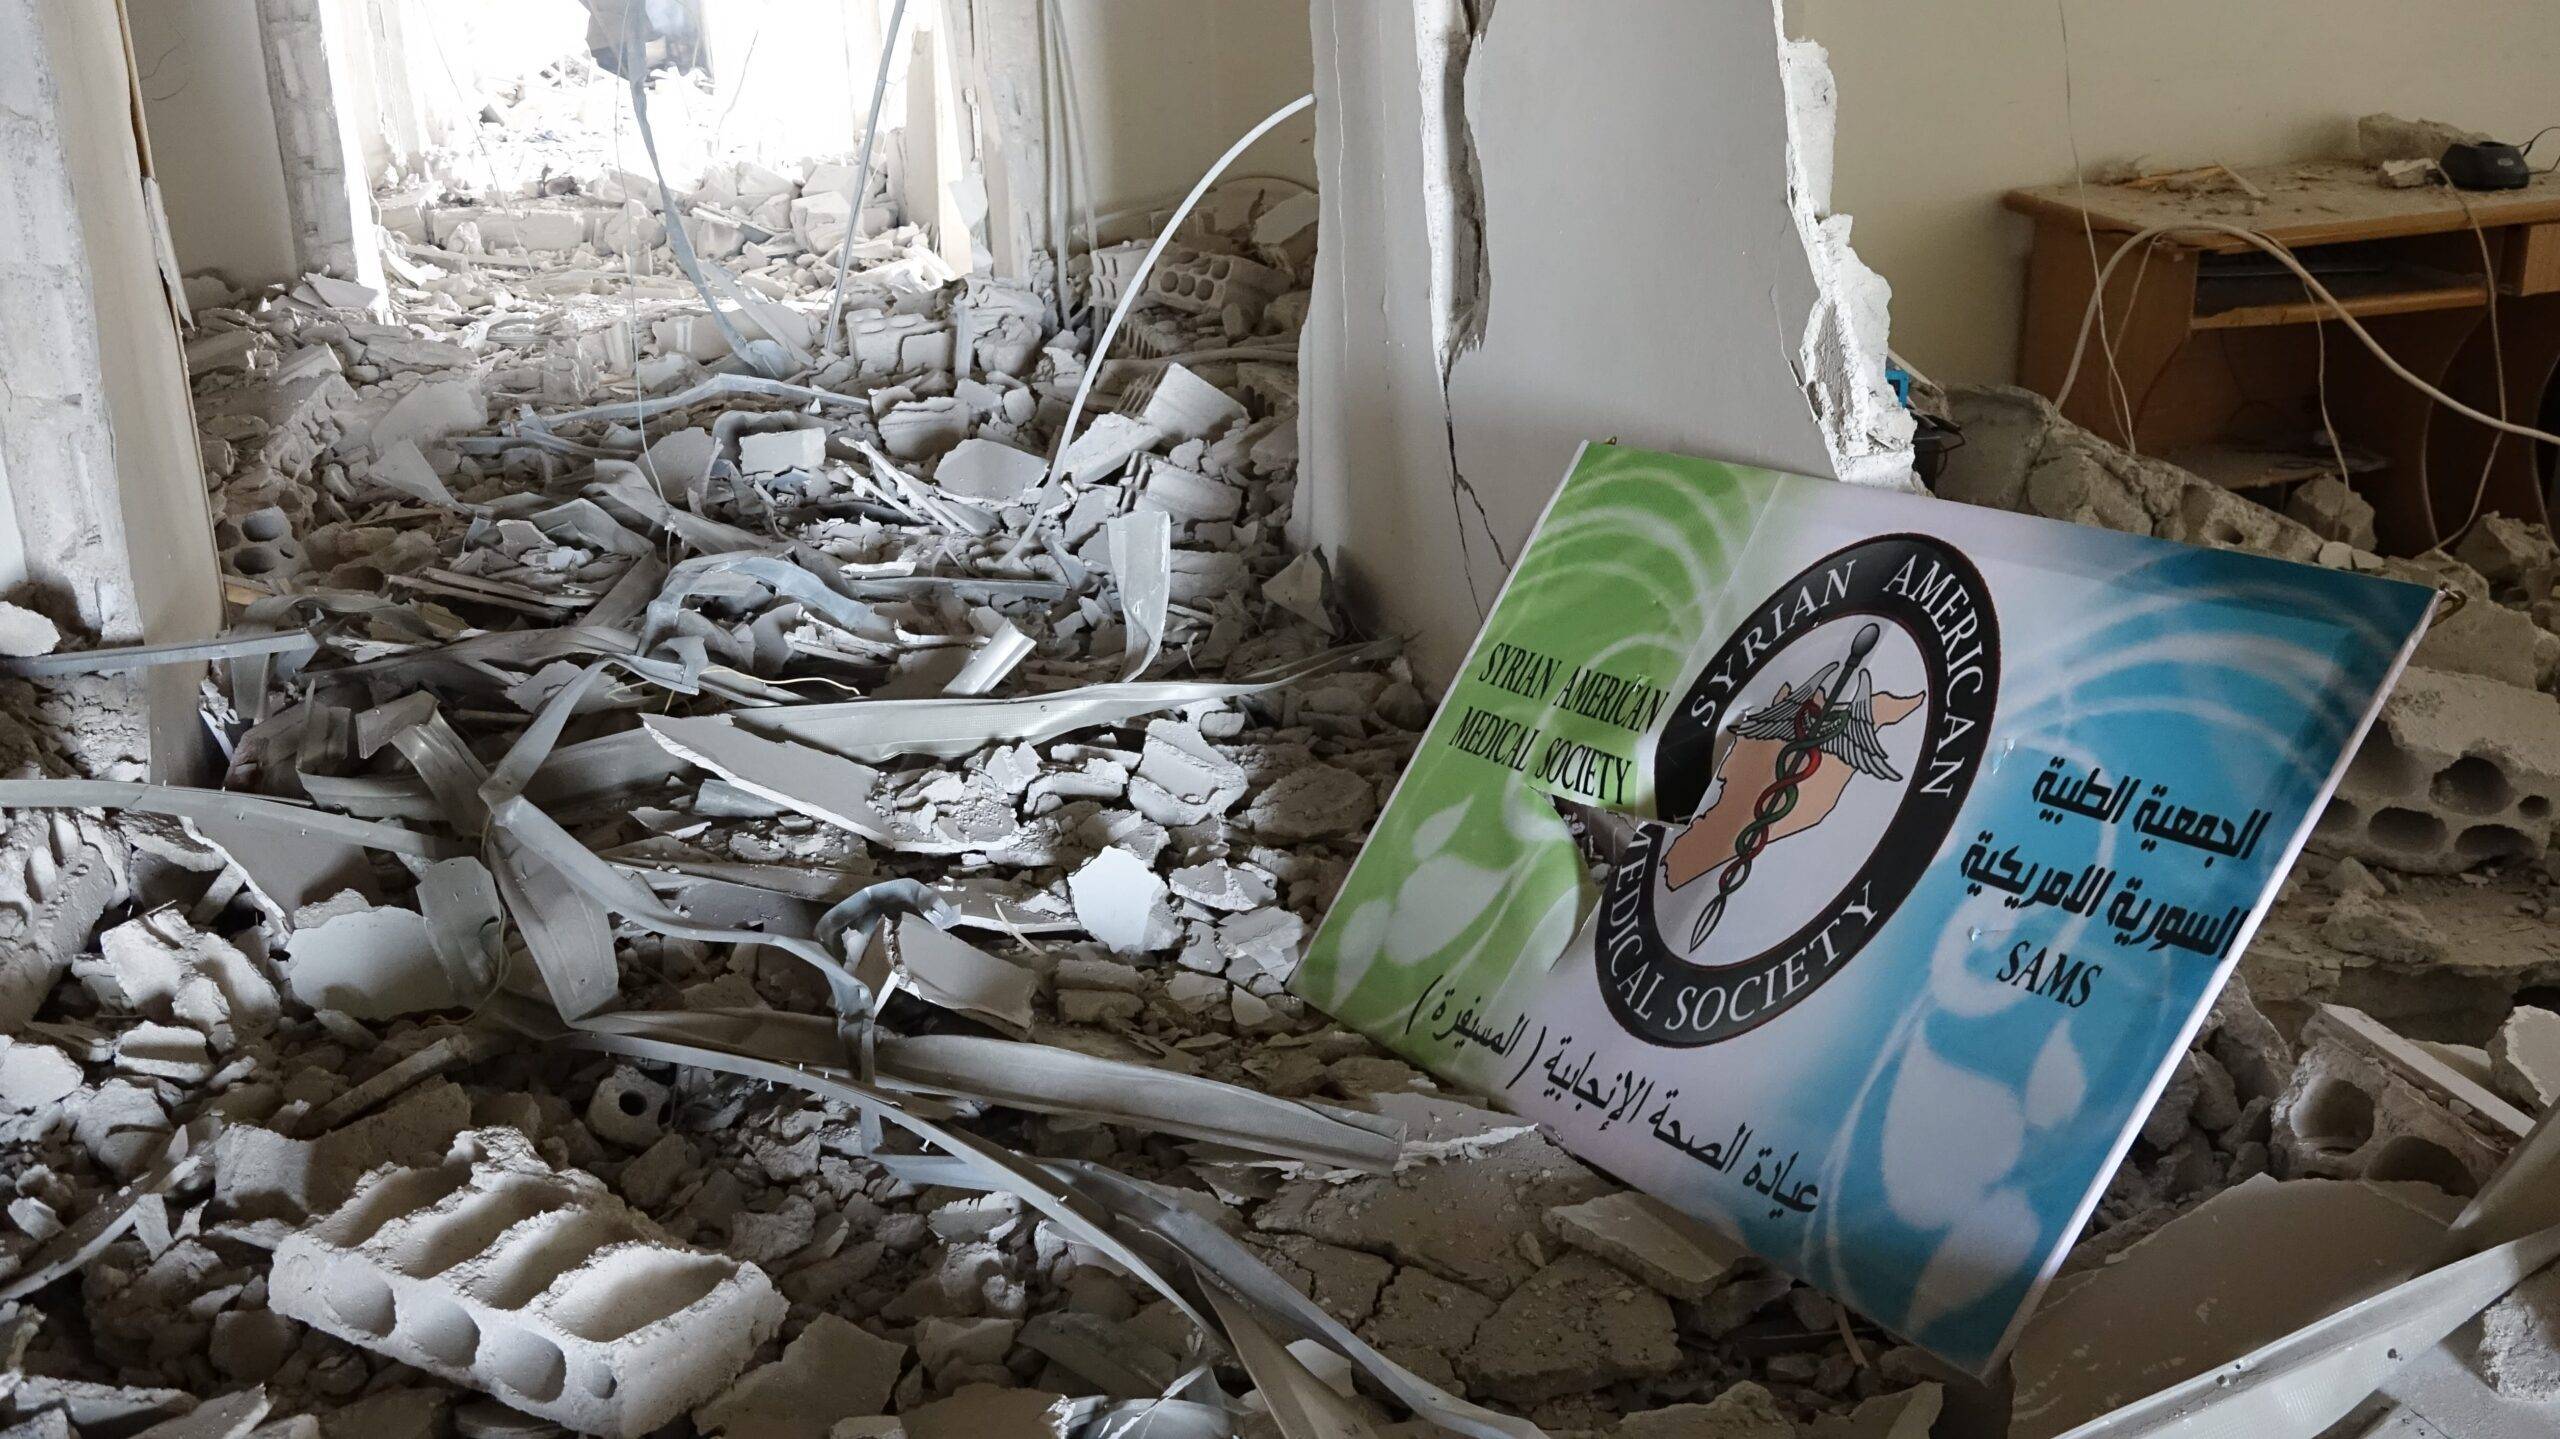 An inside view of the damaged Mseifra Hospital is seen after air raids targeted the area in Mseifra town of Daraa, Syria on 28 June, 2018 [Ammar Al Ali/Anadolu Agency]